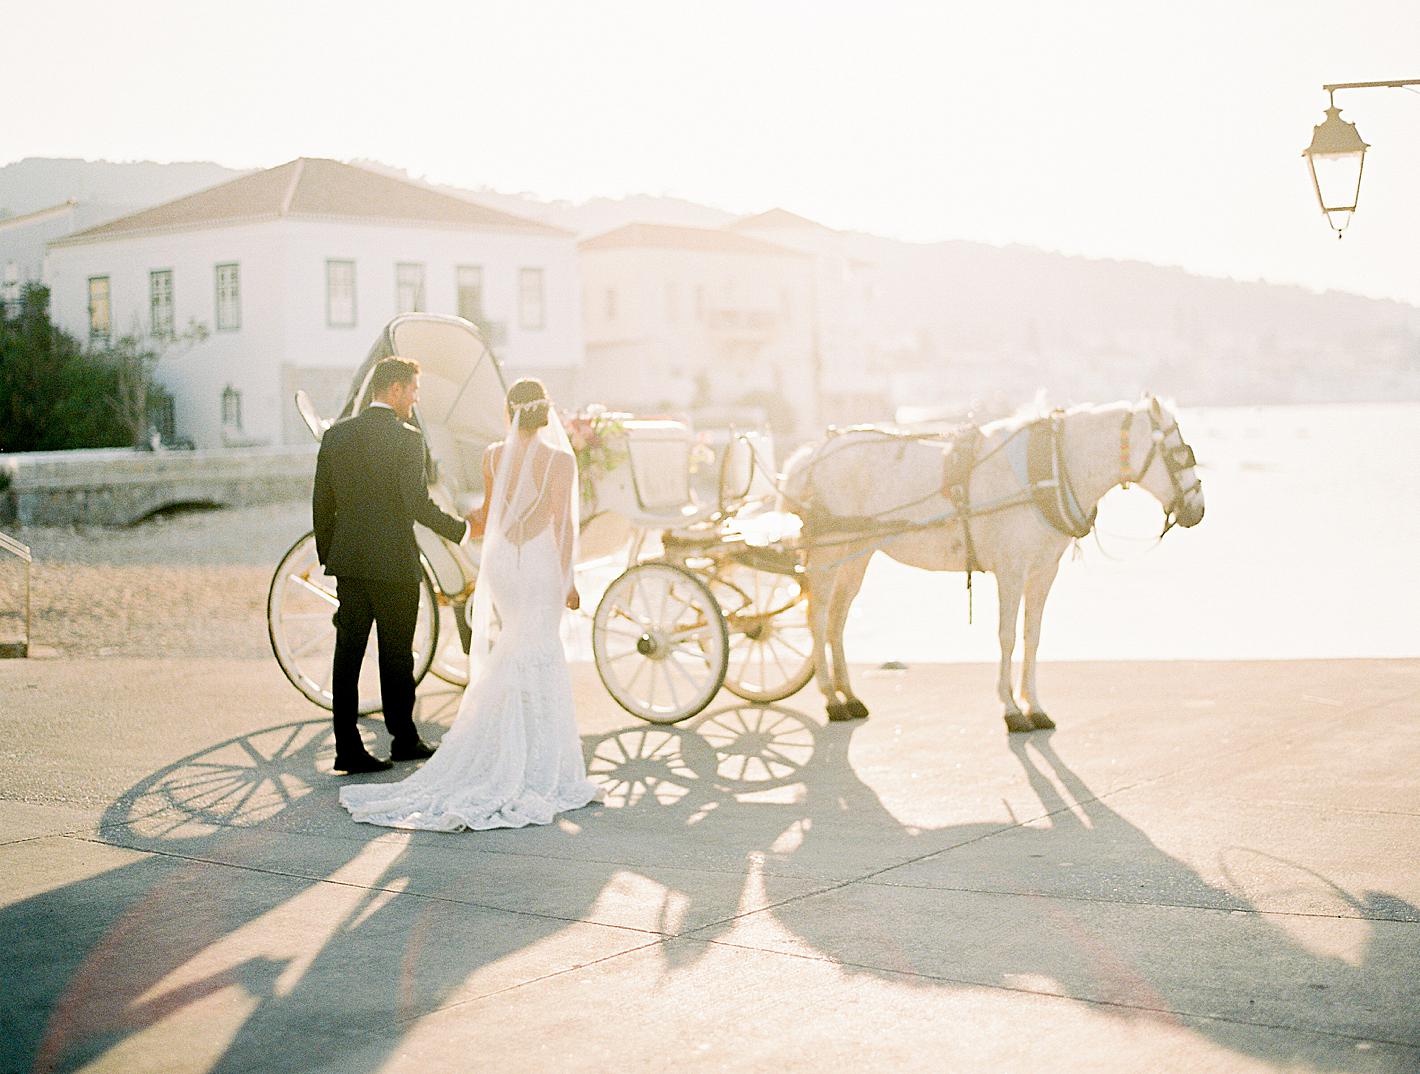 bride and groom at portrait session at poseidonio hotel in spetses island greece